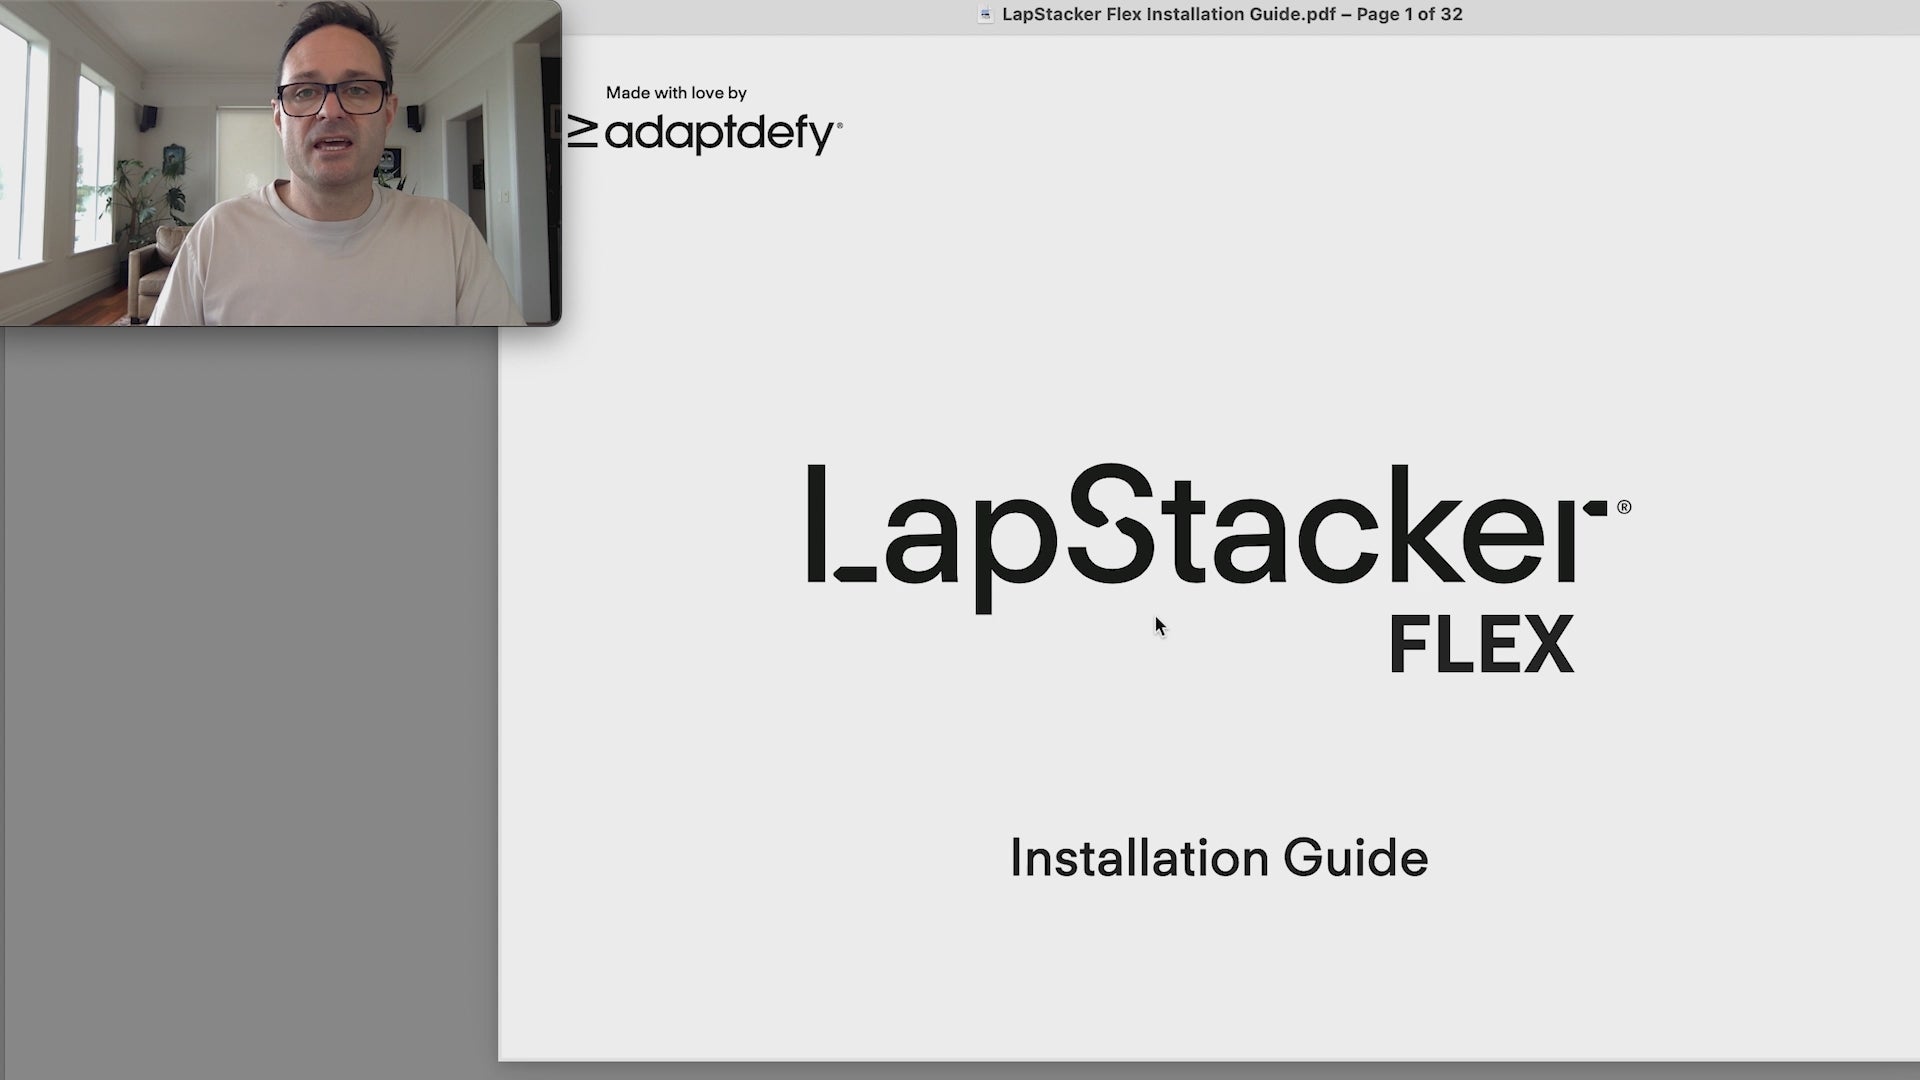 Mike talking through the installation of LapStacker flex using a screen share of the installation guide in pdf